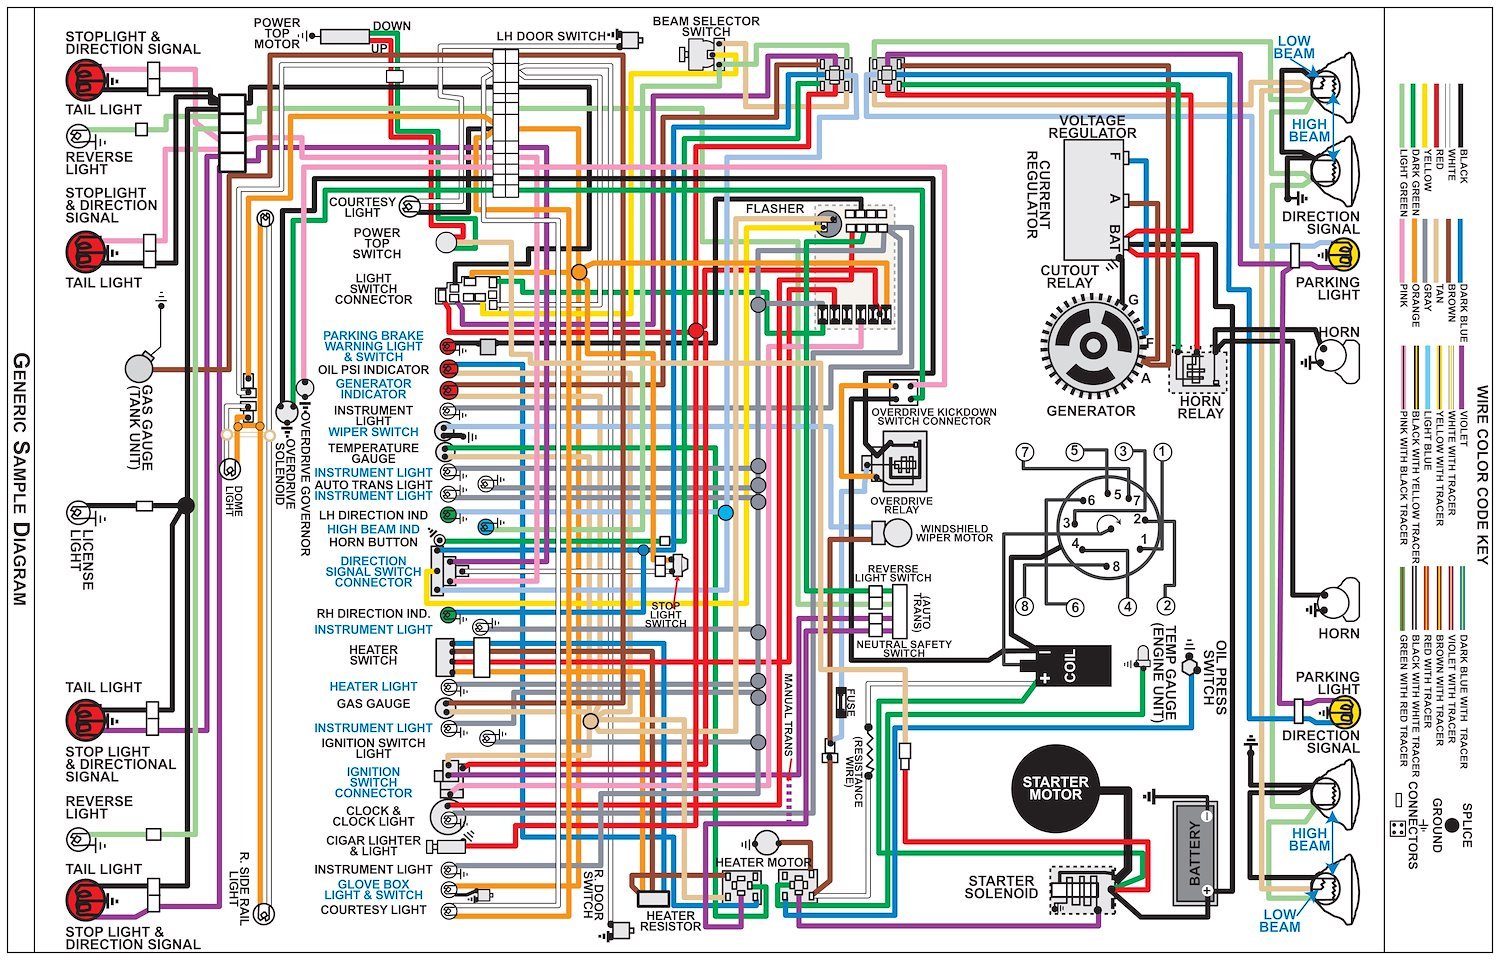 Wiring Diagram for 1972 Dodge Challenger with Rallye Dash, 11 in x 17 in., Laminated